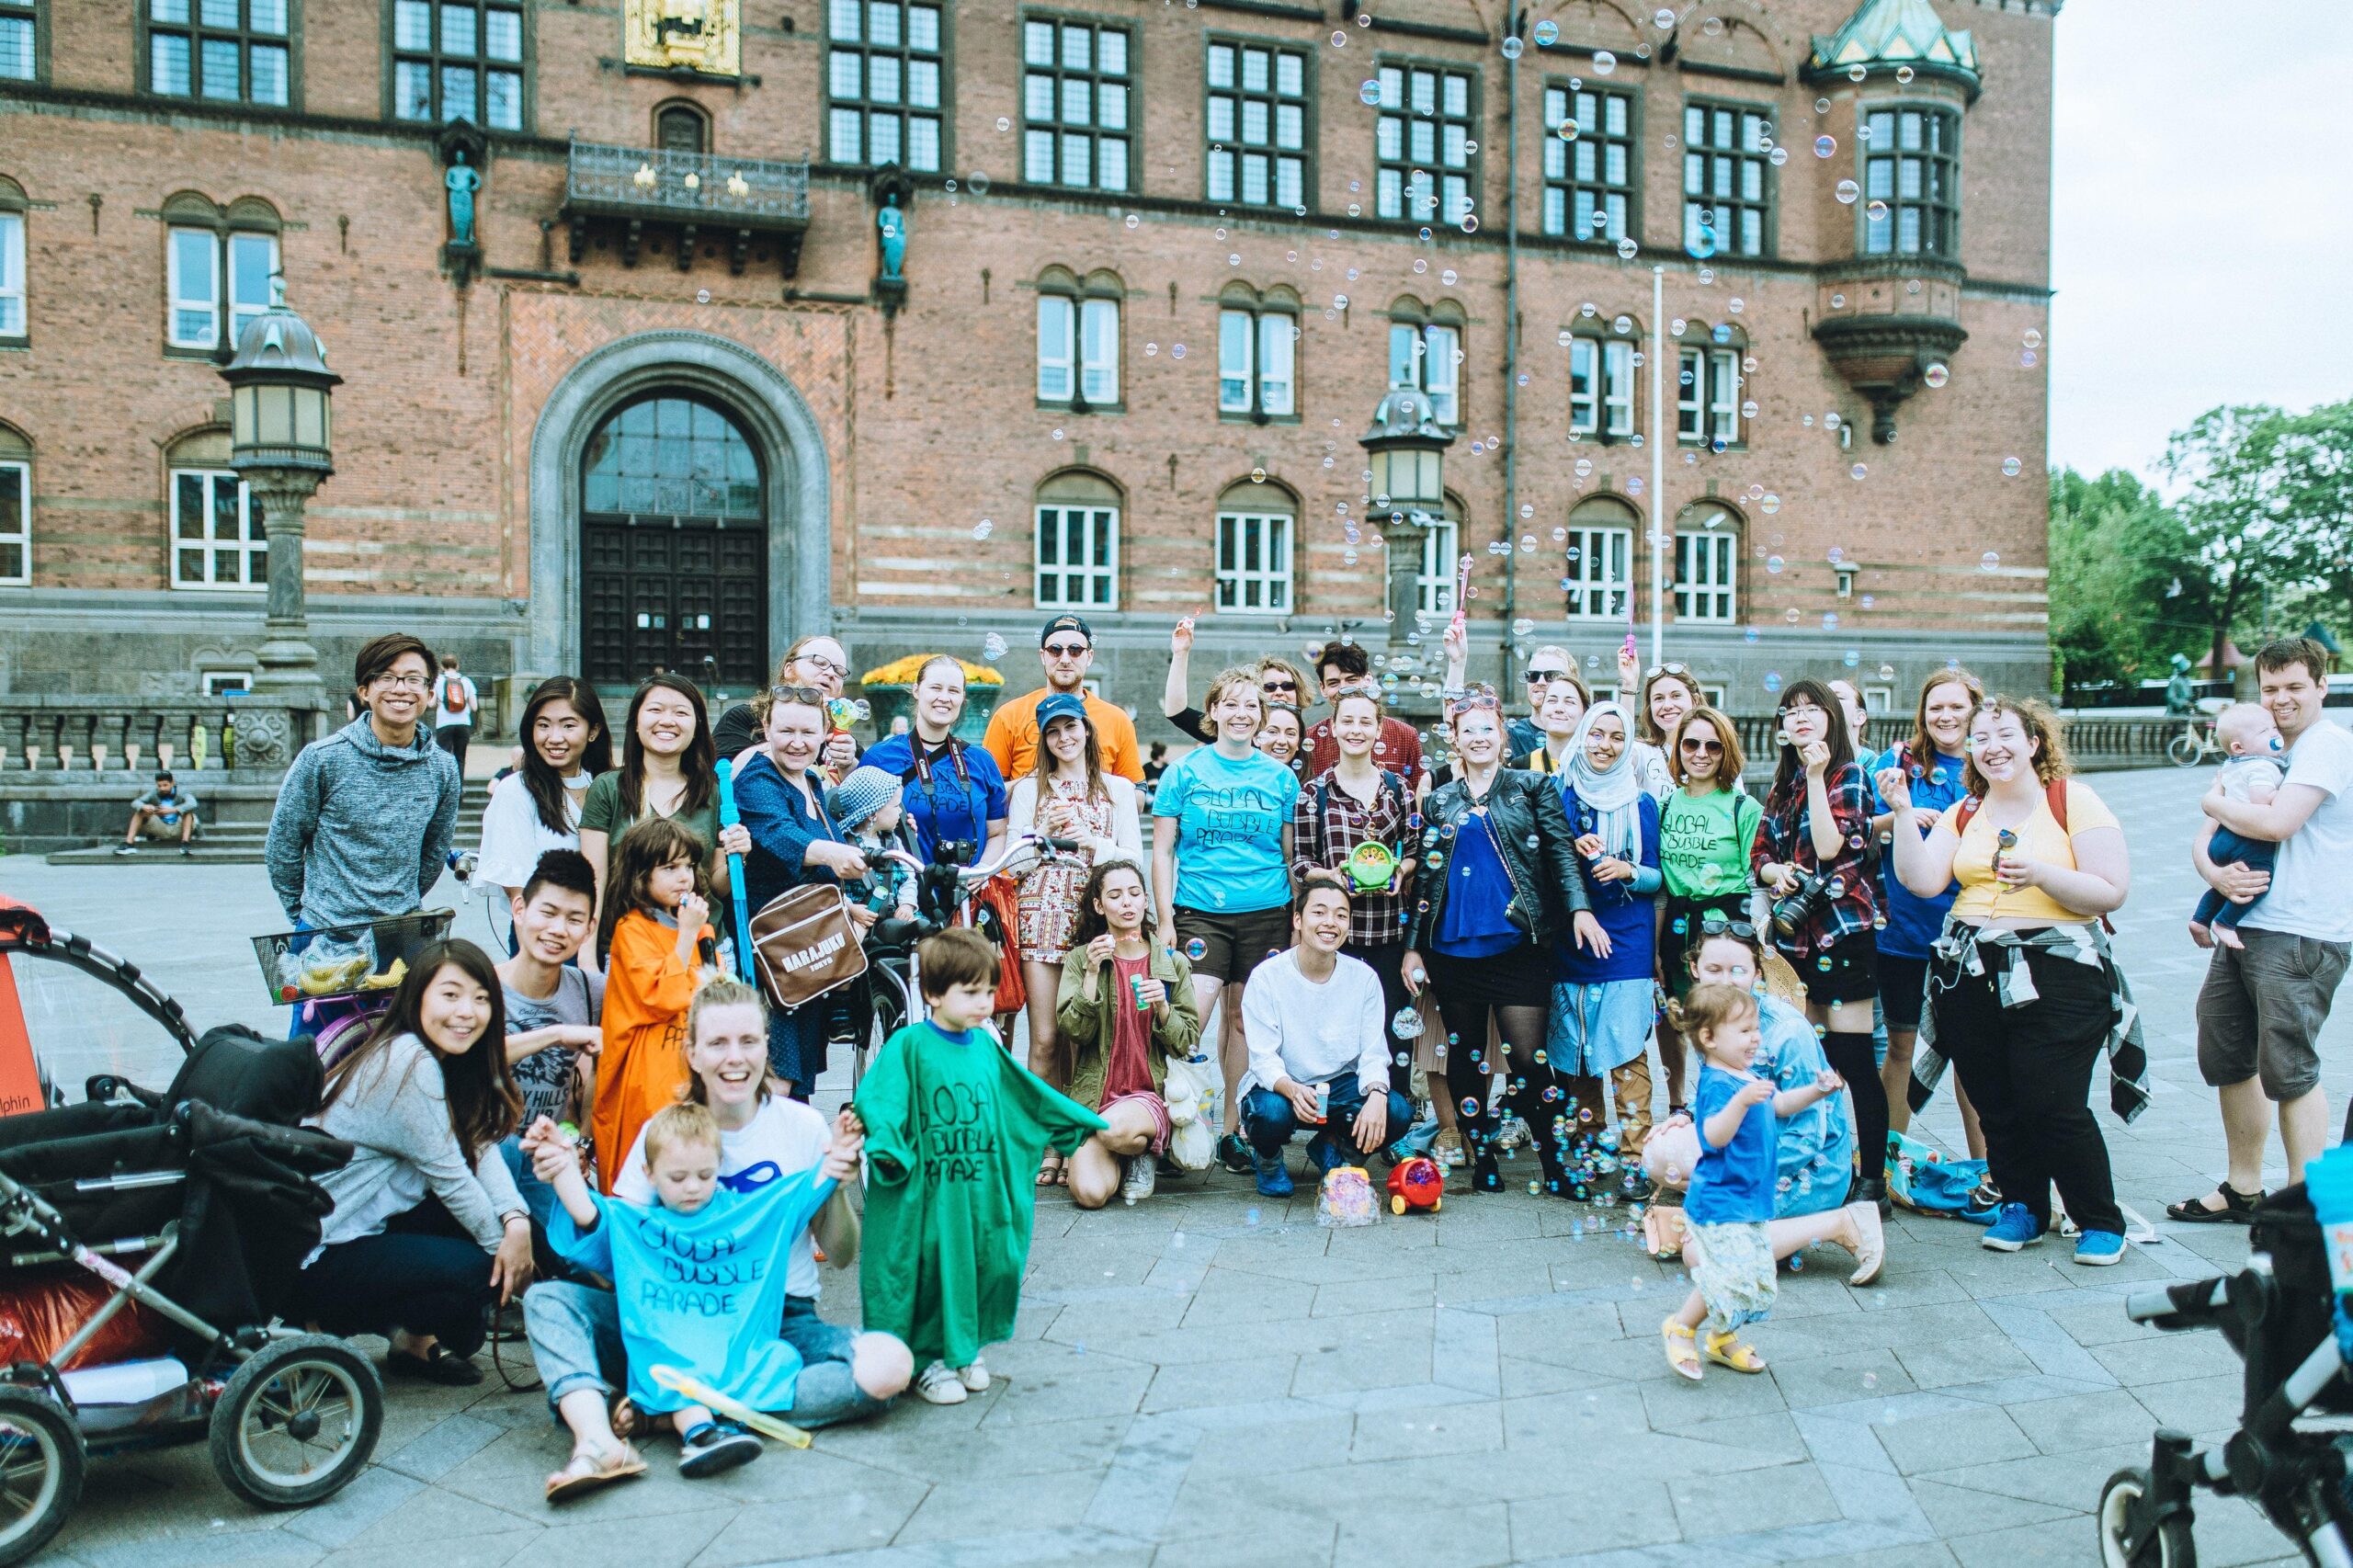 Many people with children in front of a castle with soap bubbles